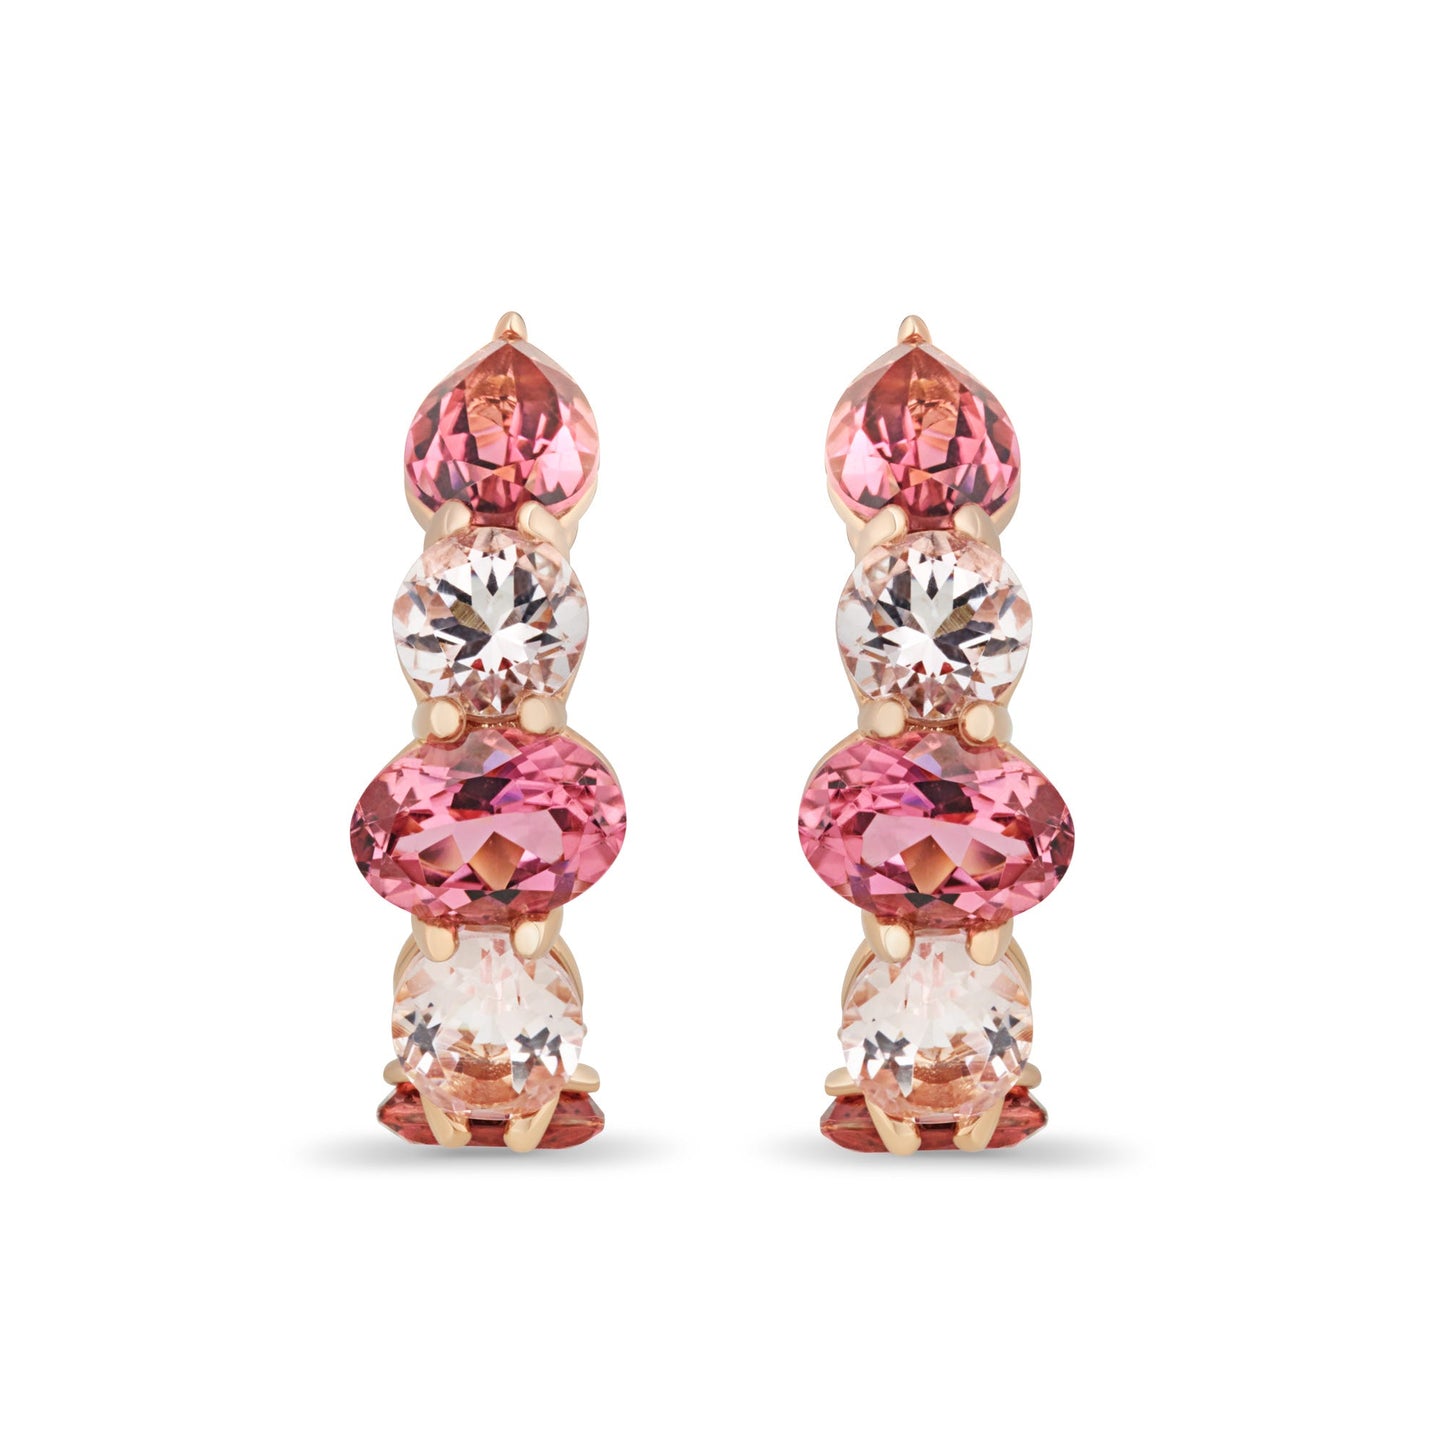 Mini Chaos Earrings in 18ct Rose Gold with Morganite and Pink Tourmaline